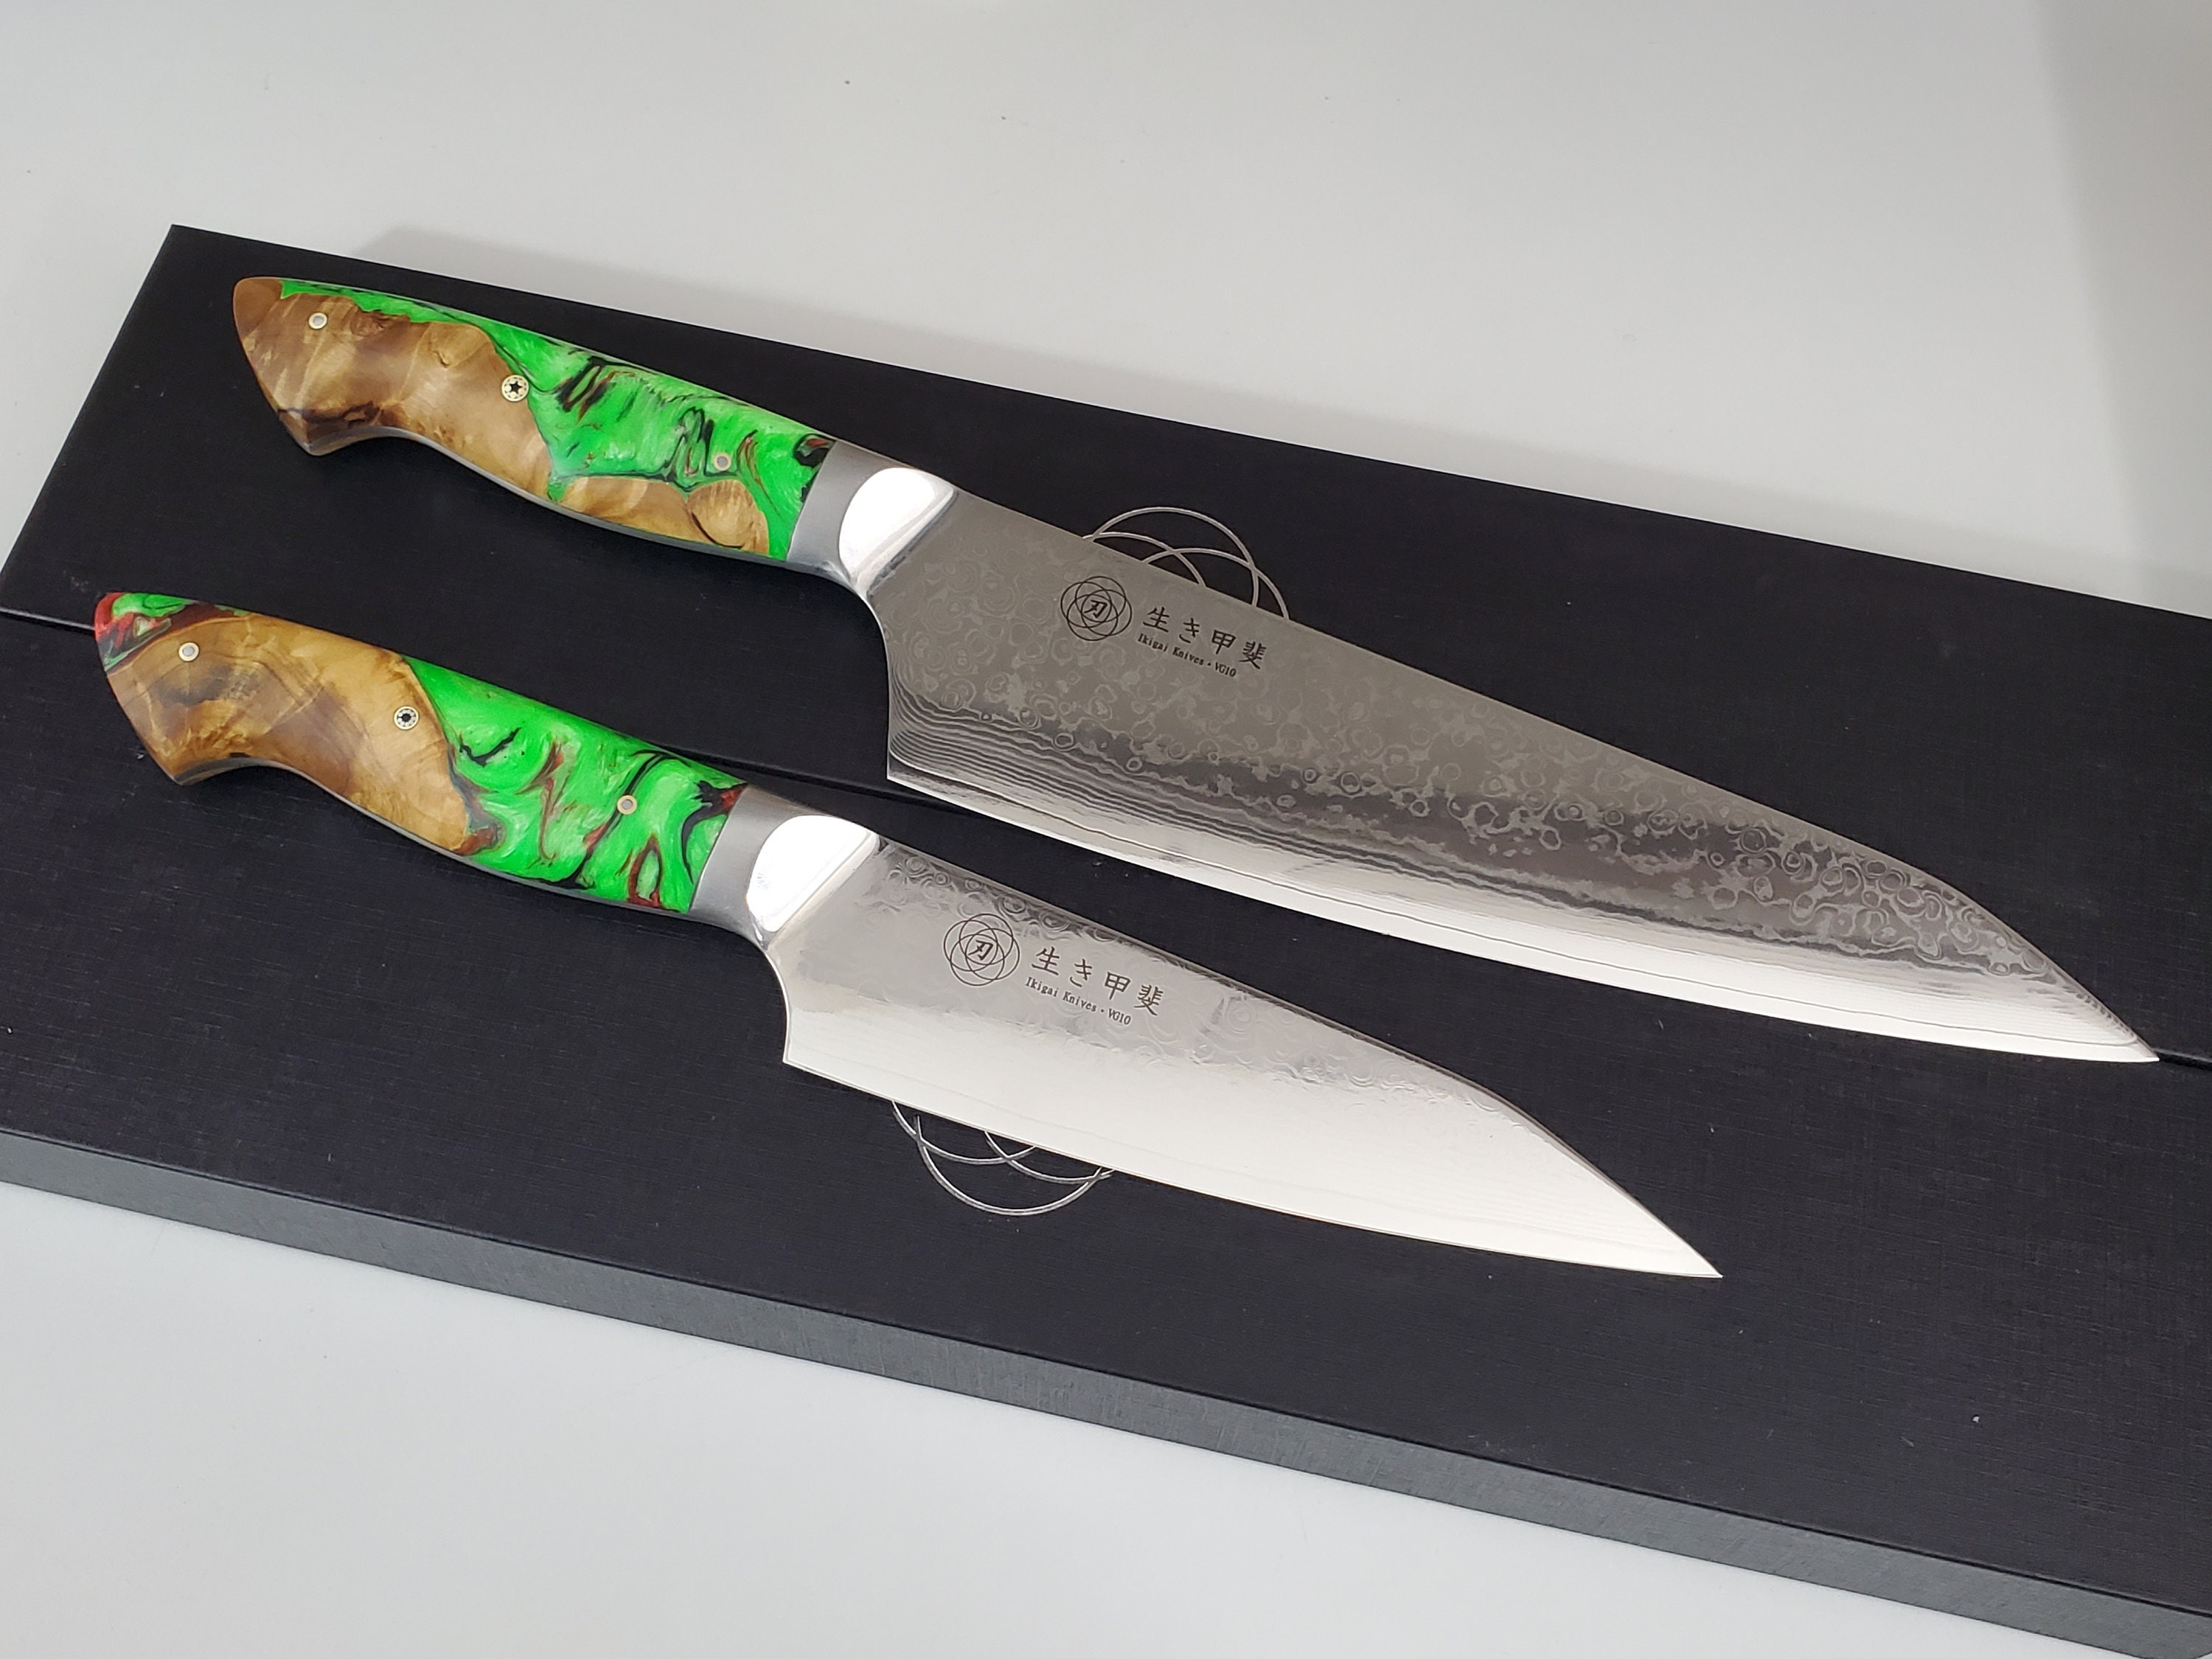 CHEF'S VISION Cosmos Kitchen Knife Set in Gift Box - Color Chef Knives -  Cooking Gifts for Husbands and Wives, Unique Wedding Gifts for Couple